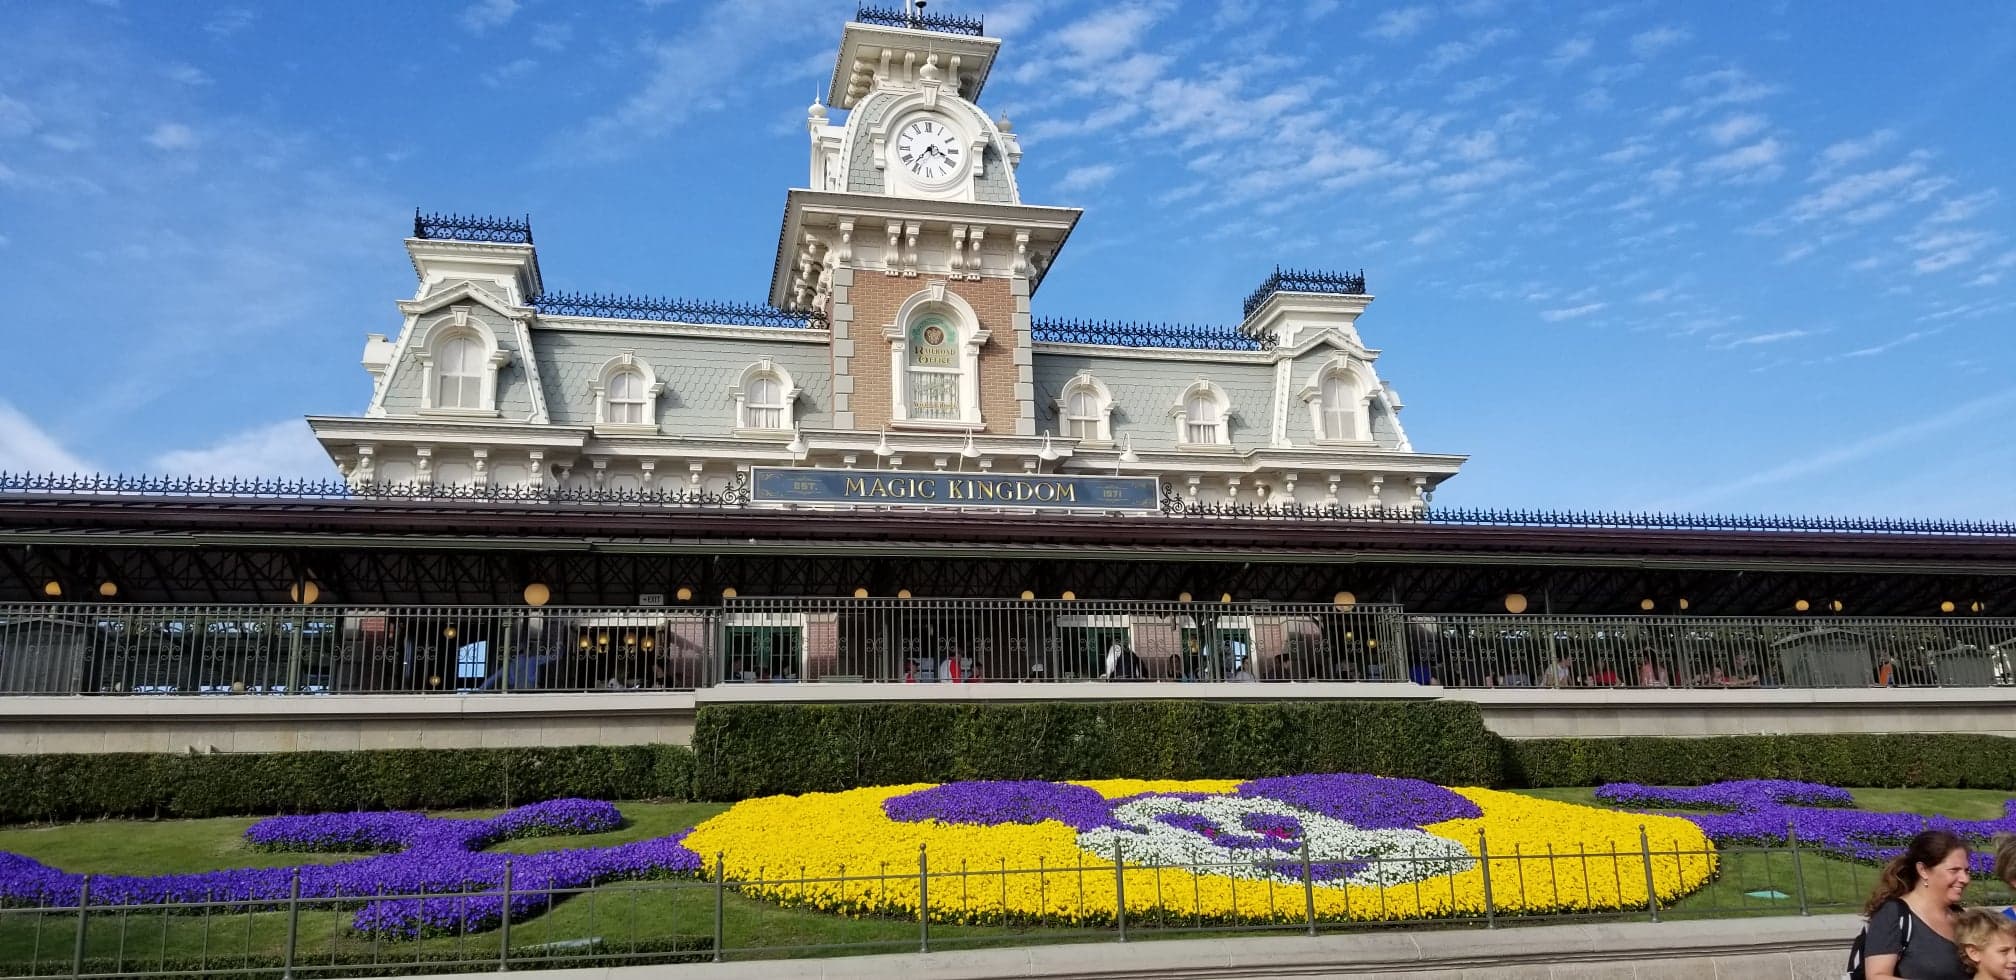 Extended Magic Kingdom Hours for Select Dates in June and July.